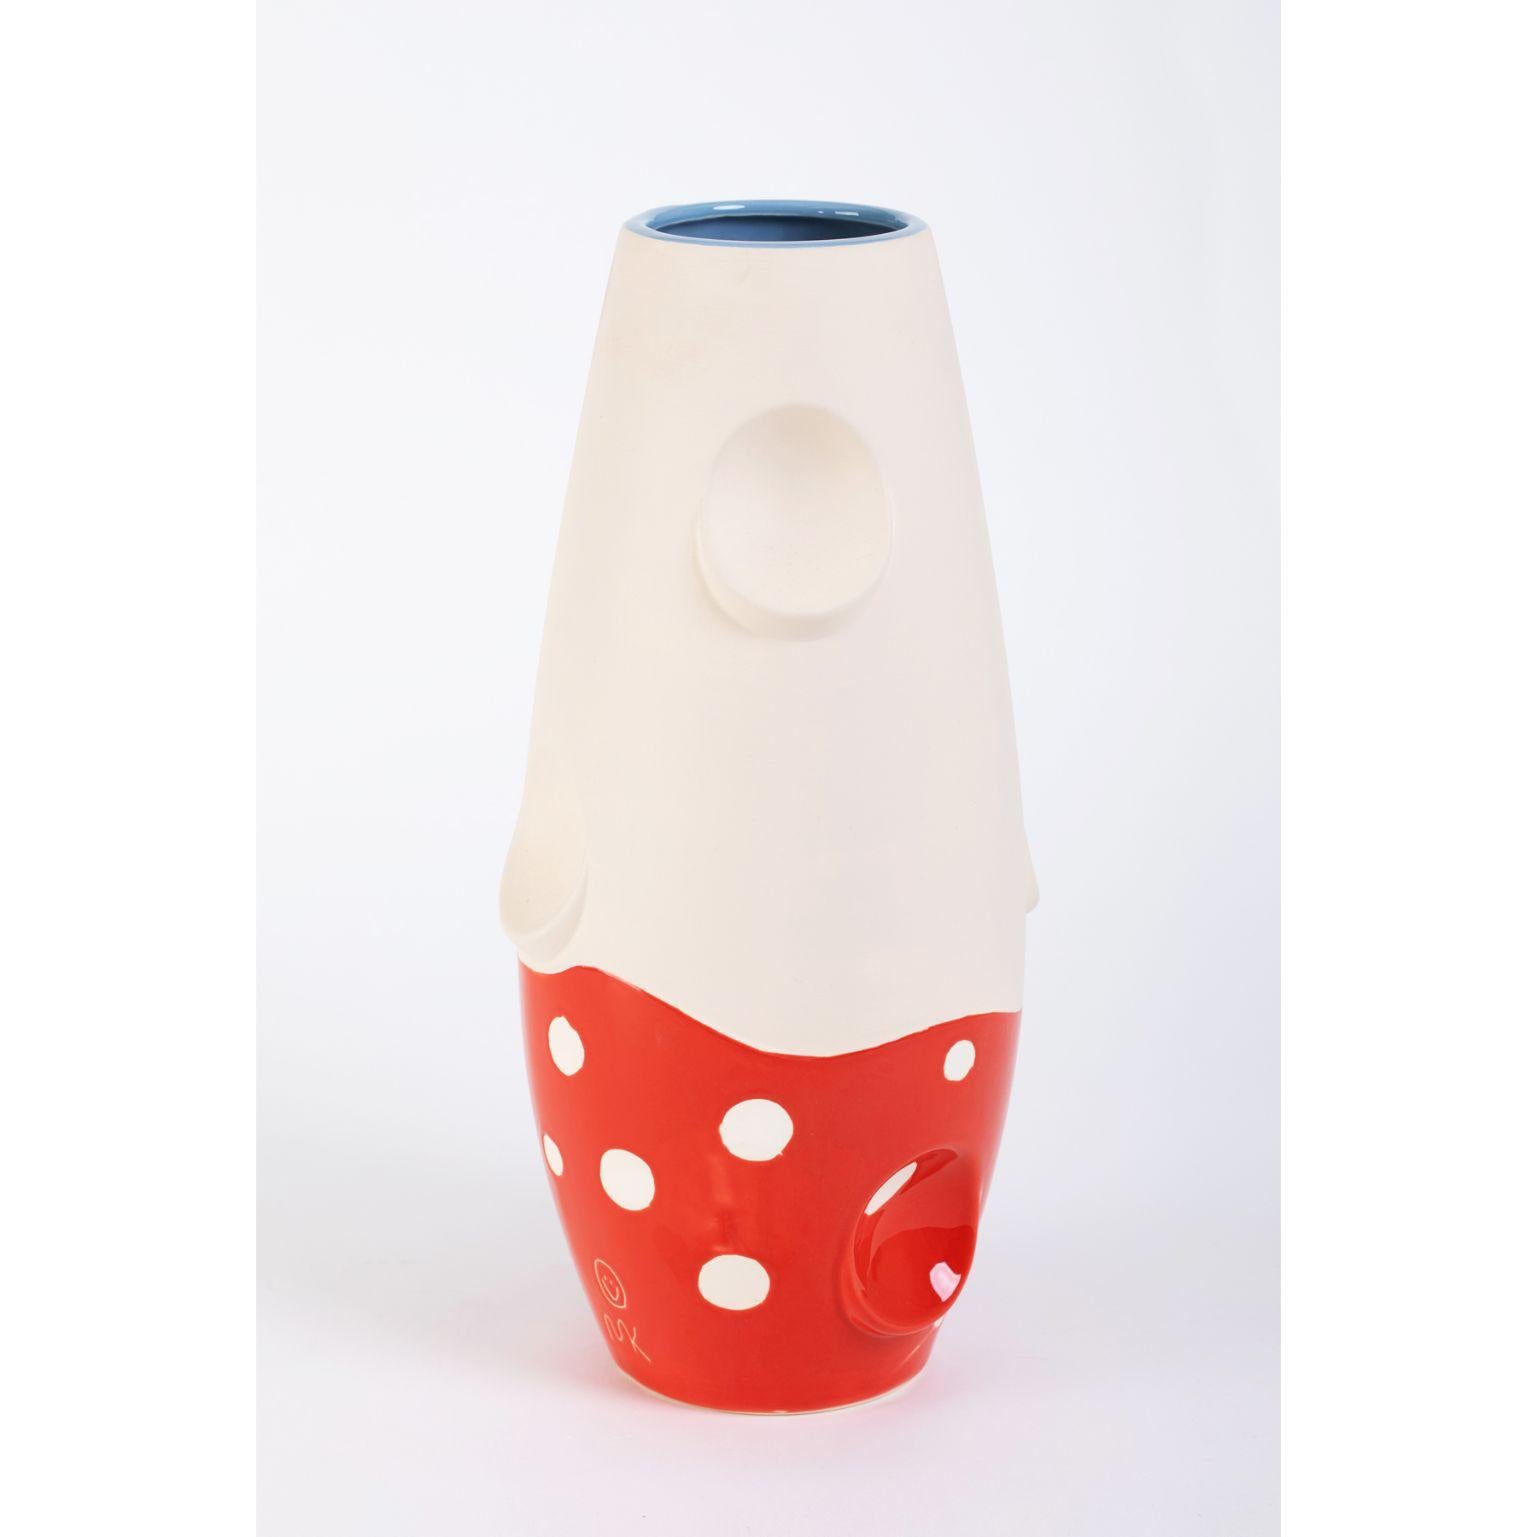 Oko pop ceramic vase - Mushroom by Malwina Konopacka
Unique Sculpture ( Decorated and hand-painted by the artist )
Materials: Impregnated ceramics, glazed interior with red glaze
Dimensions: D19, H42 cm

Also available: Circus, denim daisy,